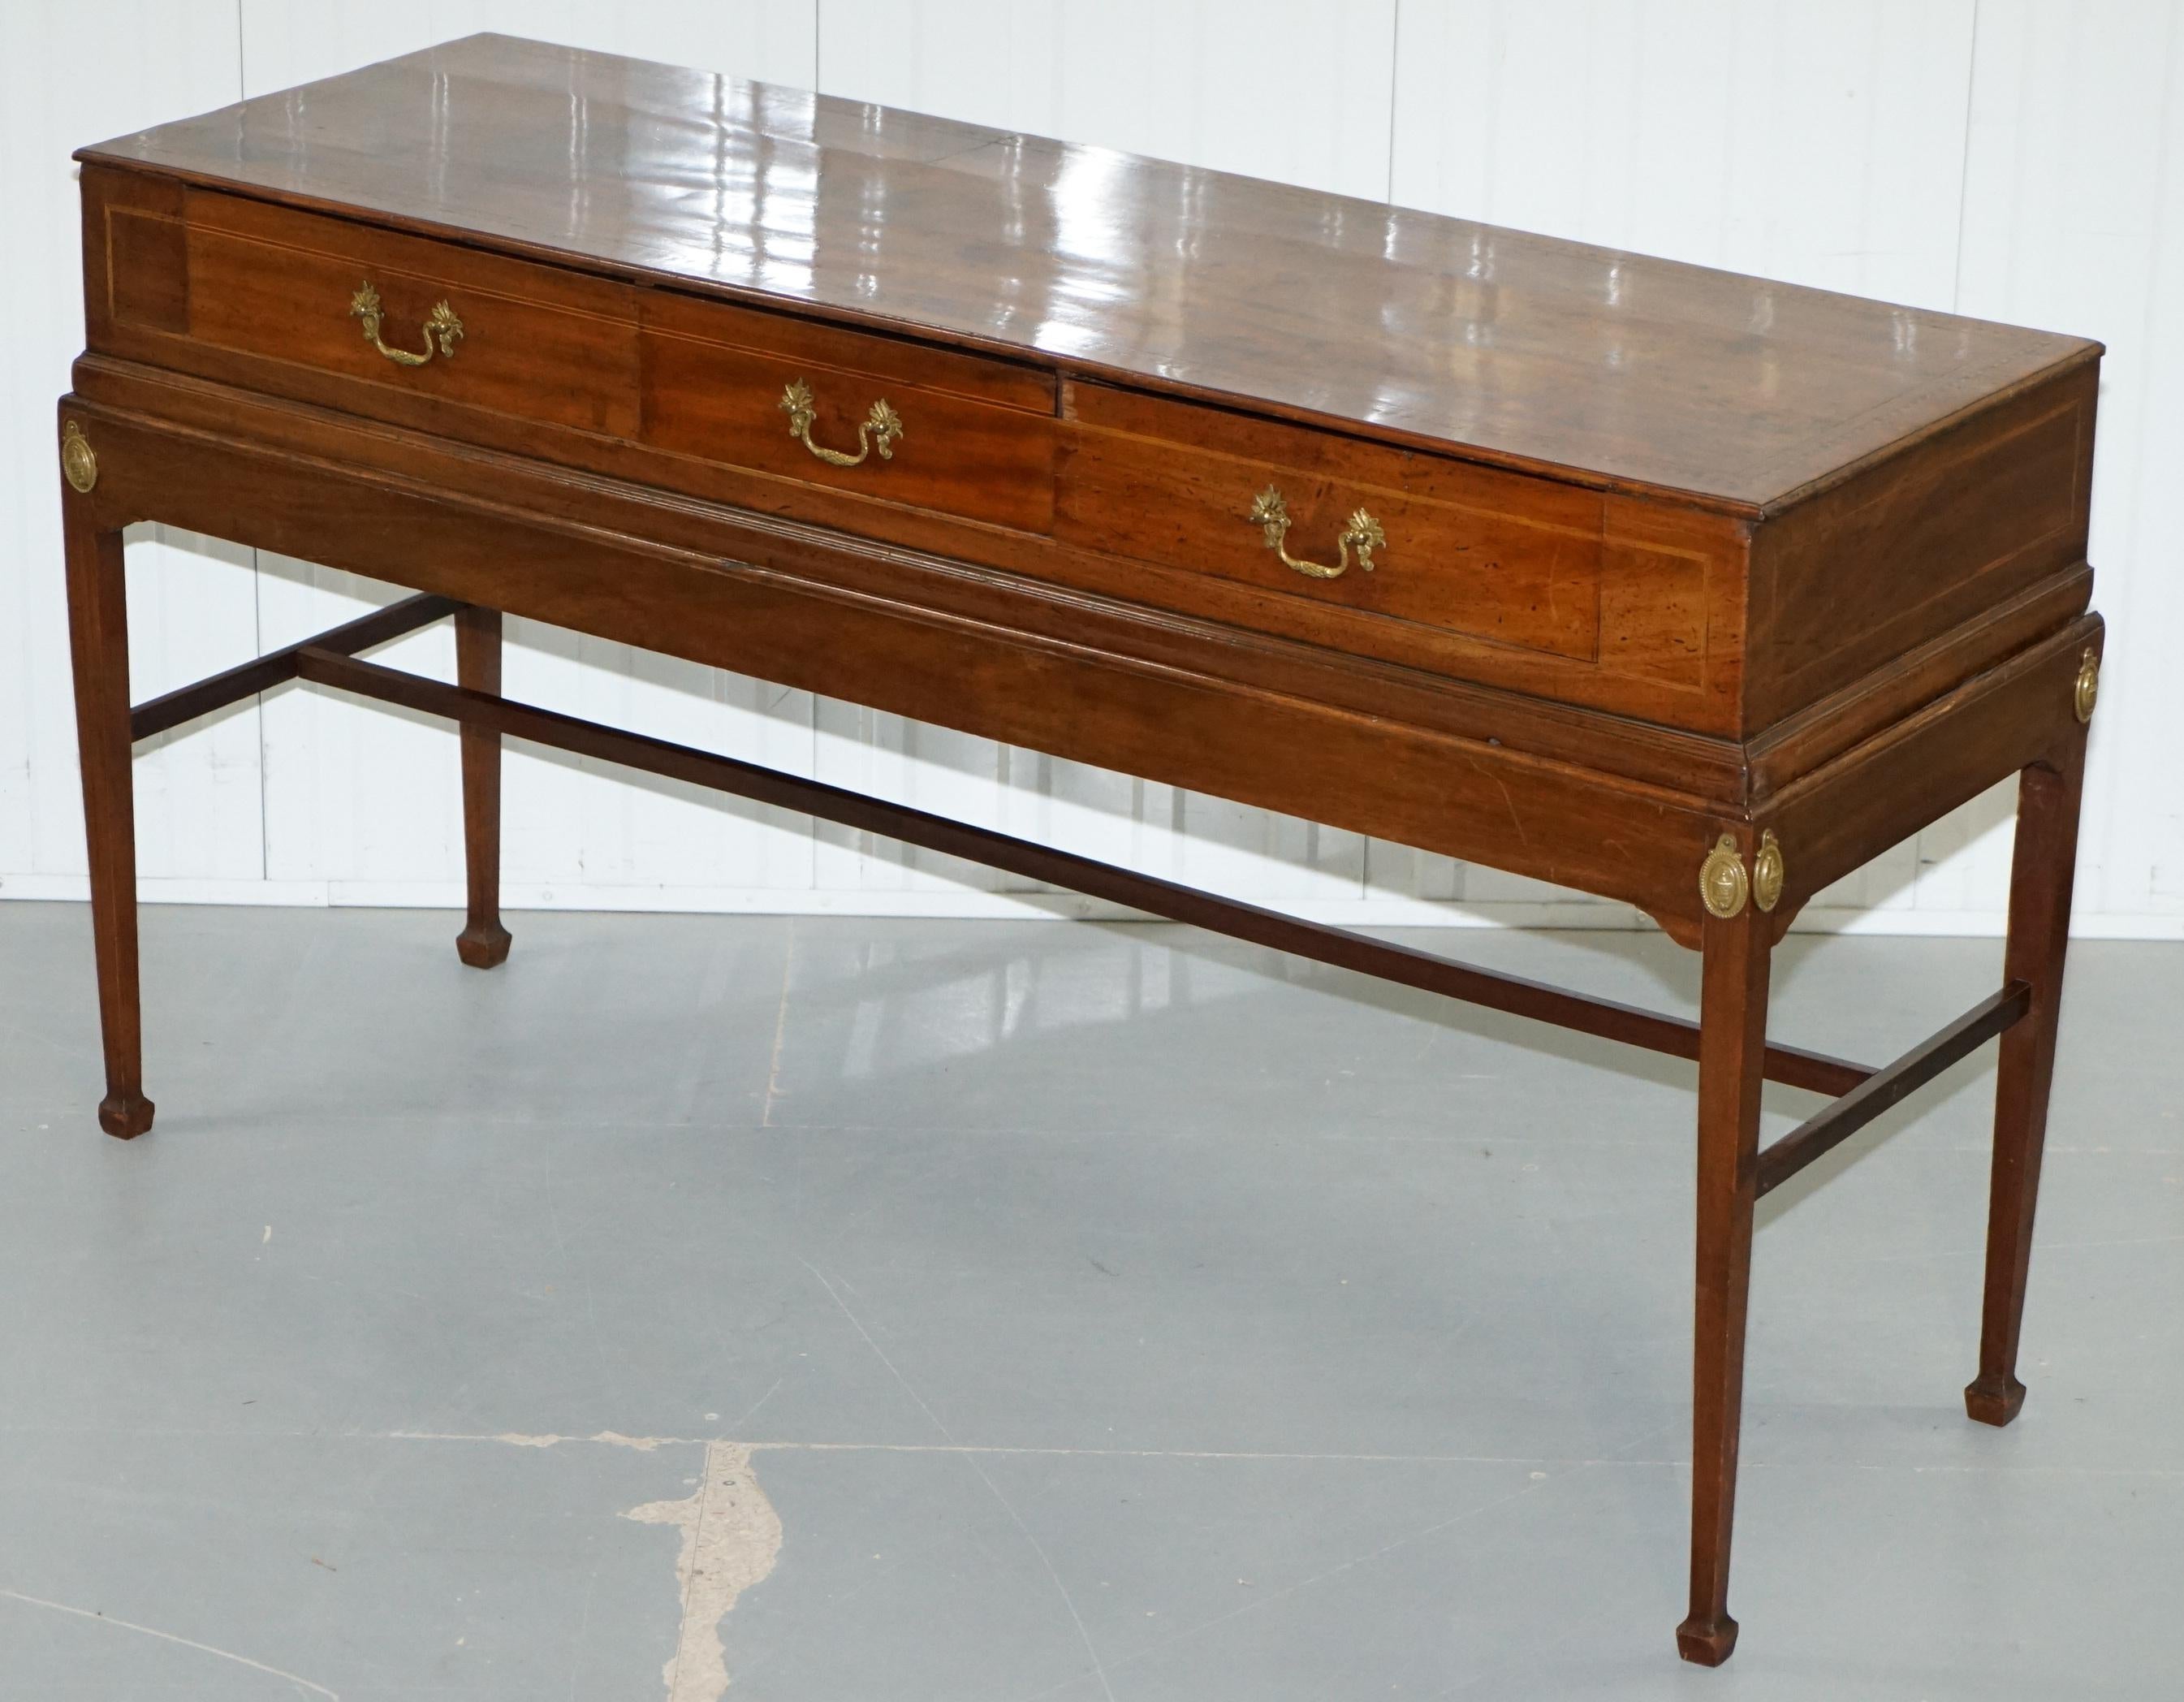 We are delighted to offer for sale is this large Georgian sideboard drawers on elegant stand 200 plus years old

A good looking and well-made piece, the top removes from the base and is very nice, the legs are log with spade feet, the top is